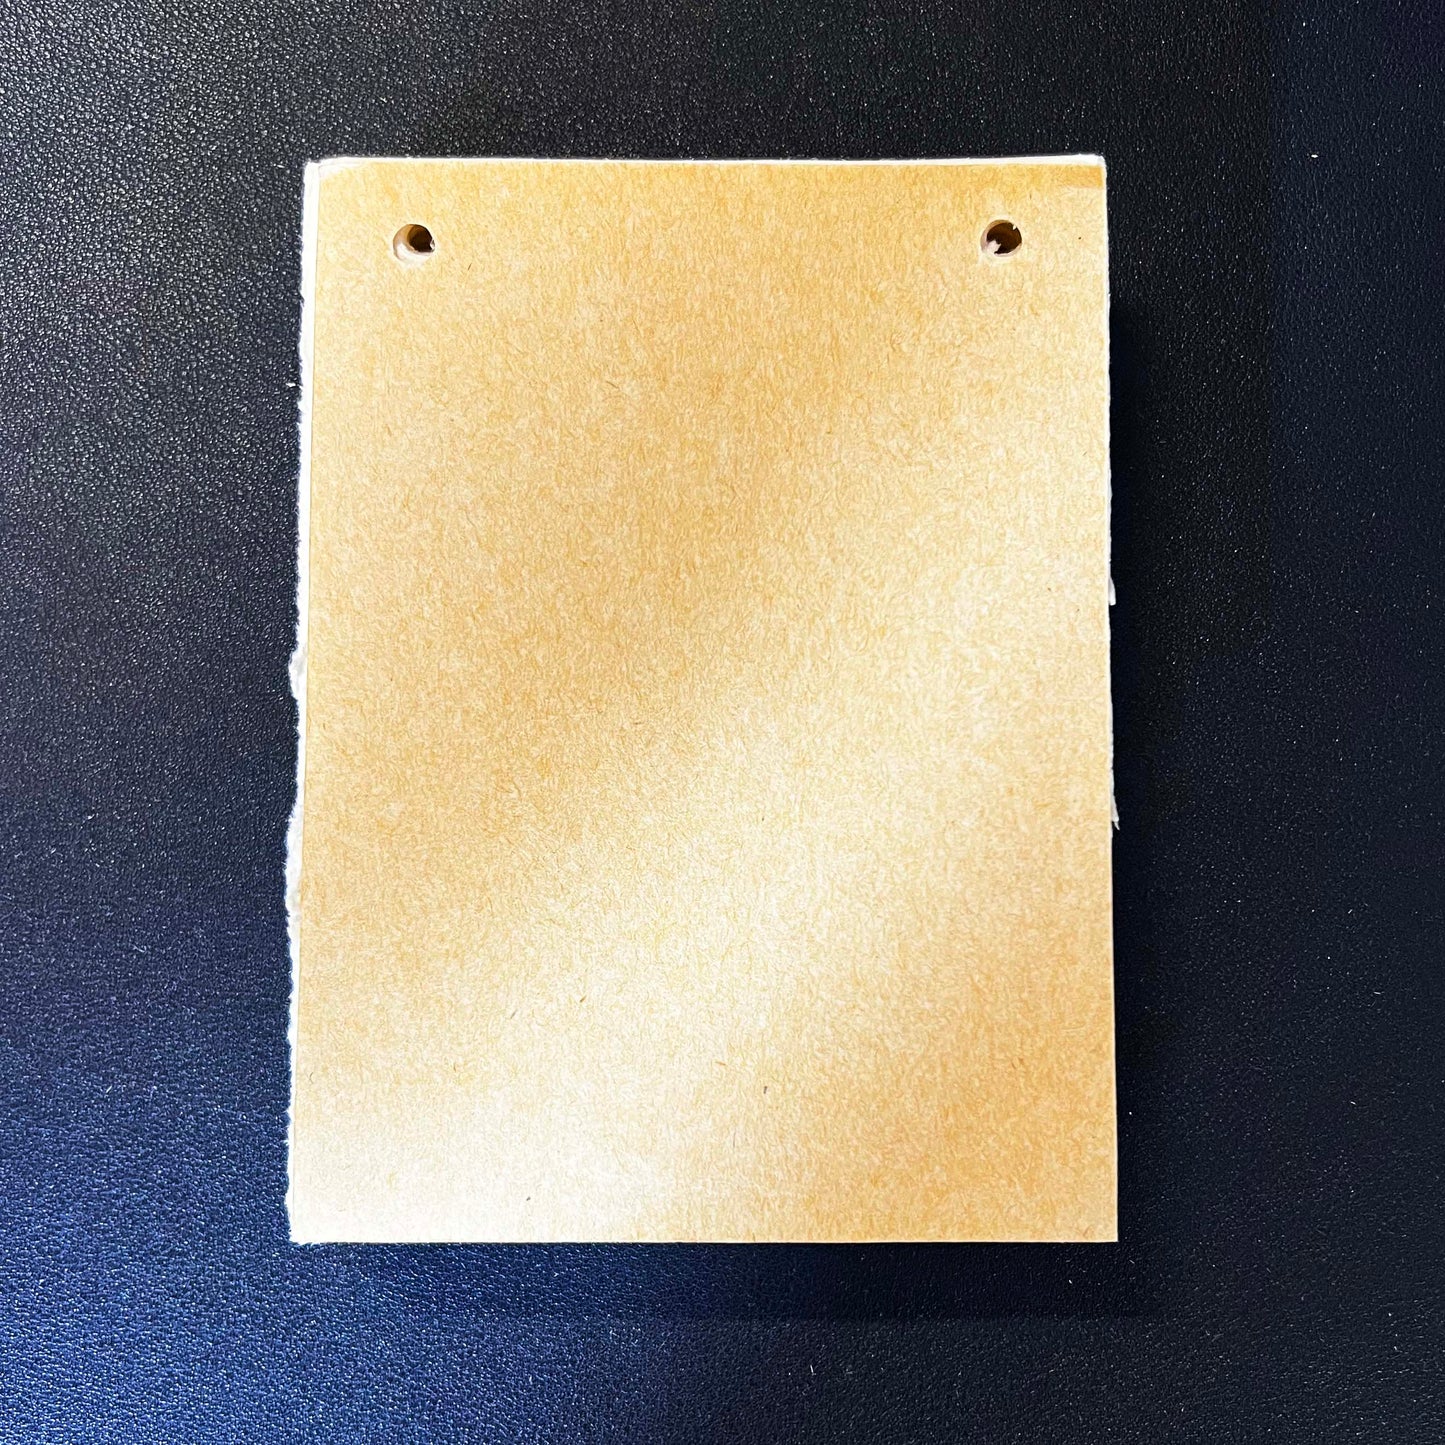 Refillable Leather Notepad - Things To Do